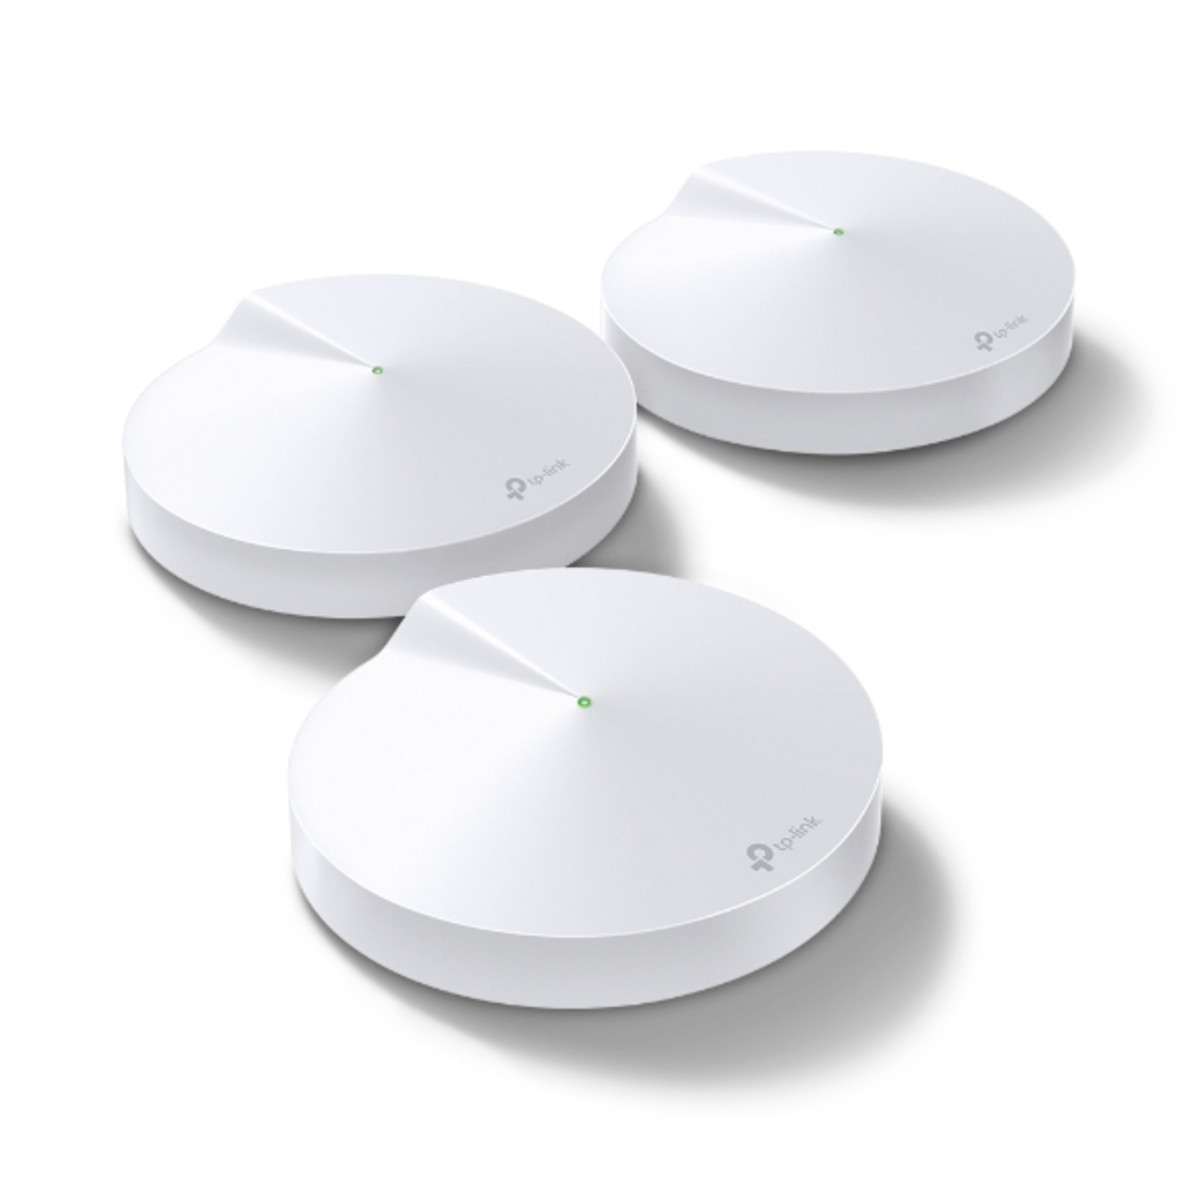 AC2200 Whole-Home Wi-Fi System (3-Pack)